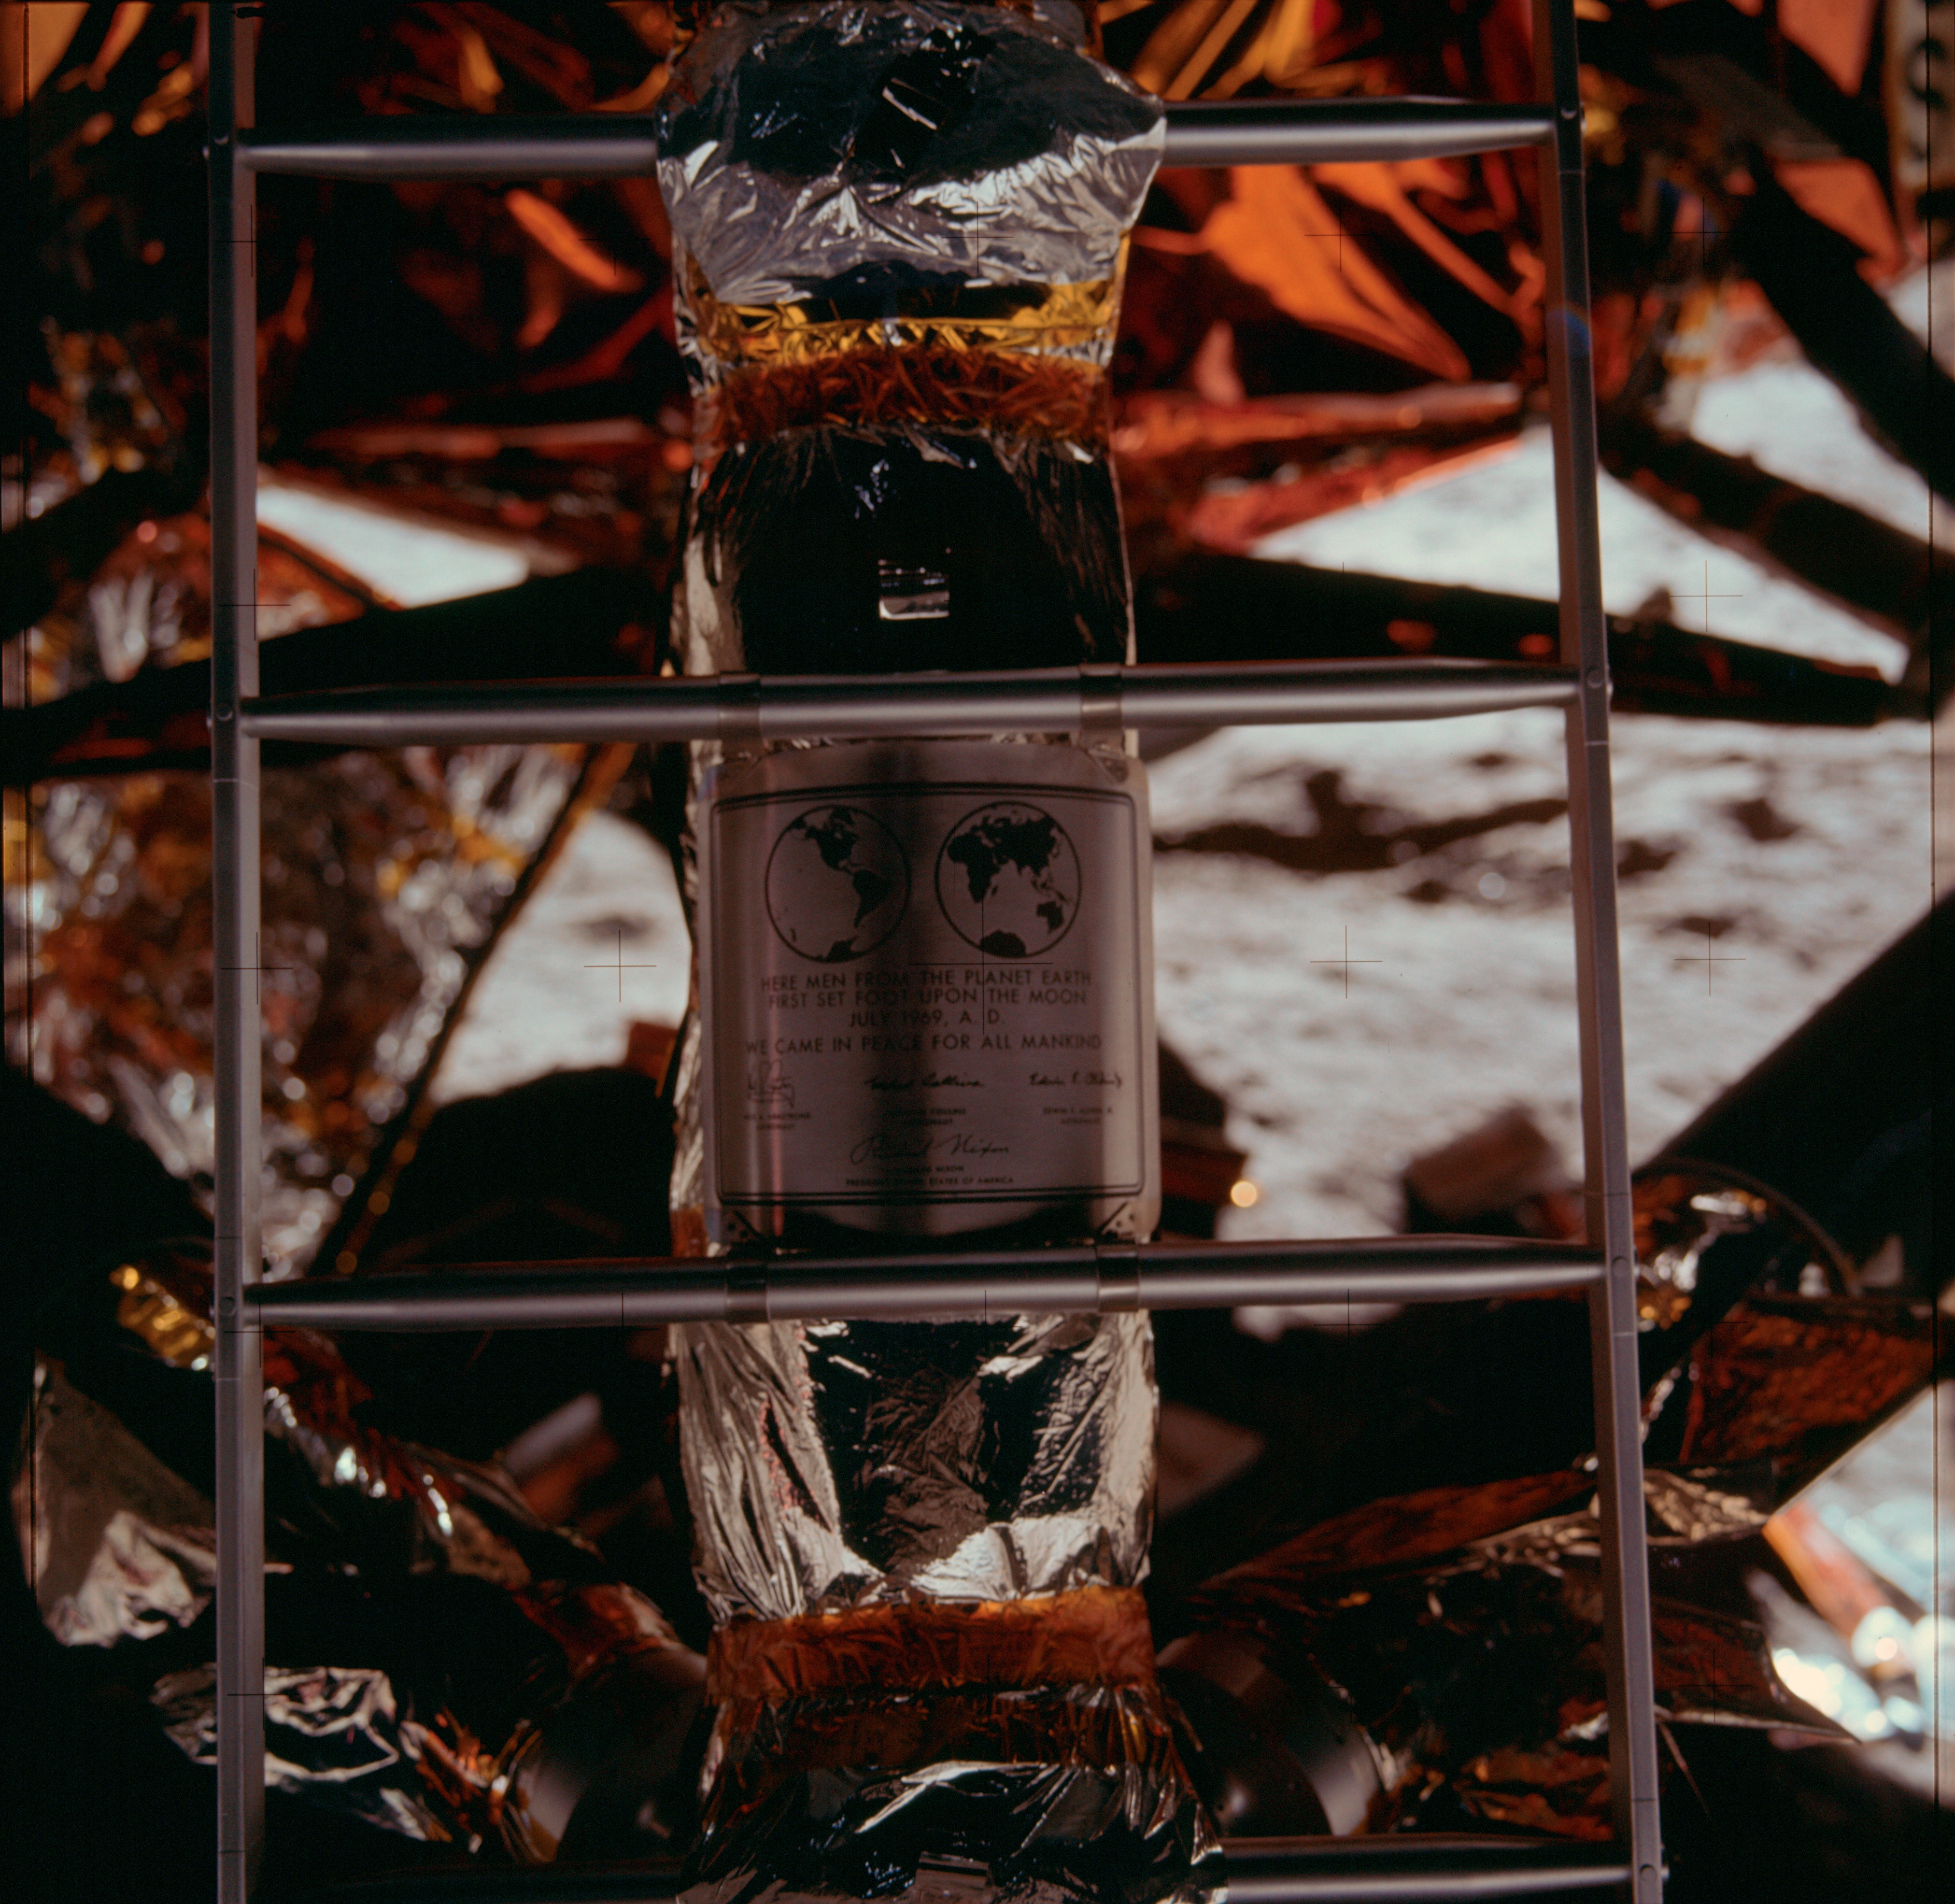 The famous Apollo 11 plaque installed on the Eagle lunar module strut, pictured during the historic moonwalking on July 21, 1969.